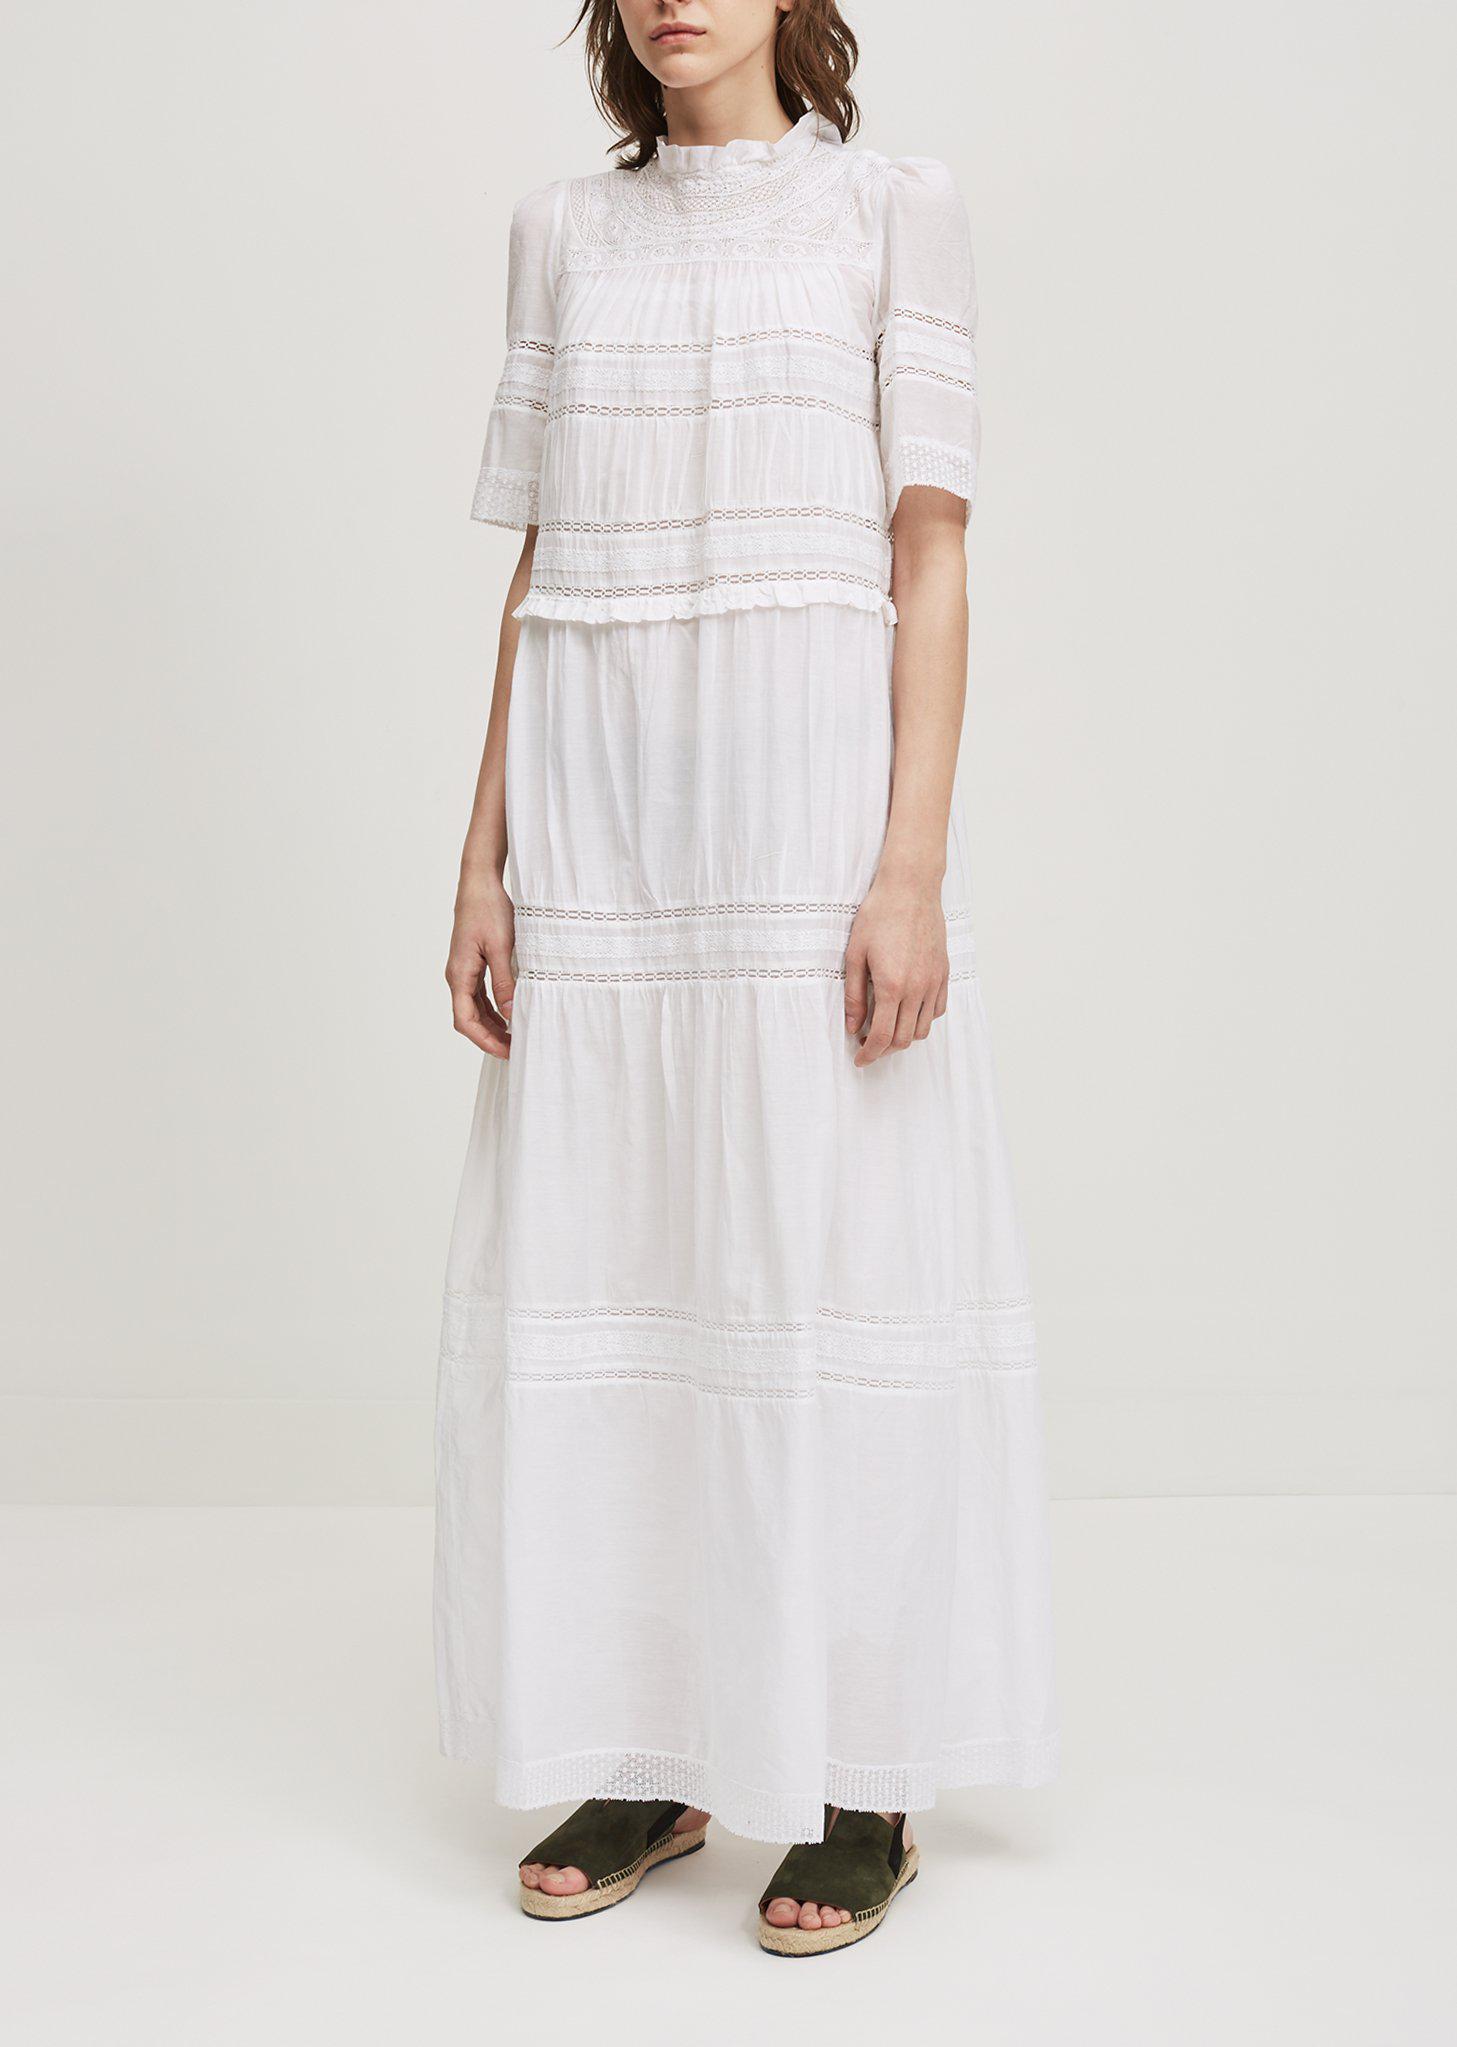 Étoile Isabel Marant Vealy Lace Cotton Dress in White - Lyst